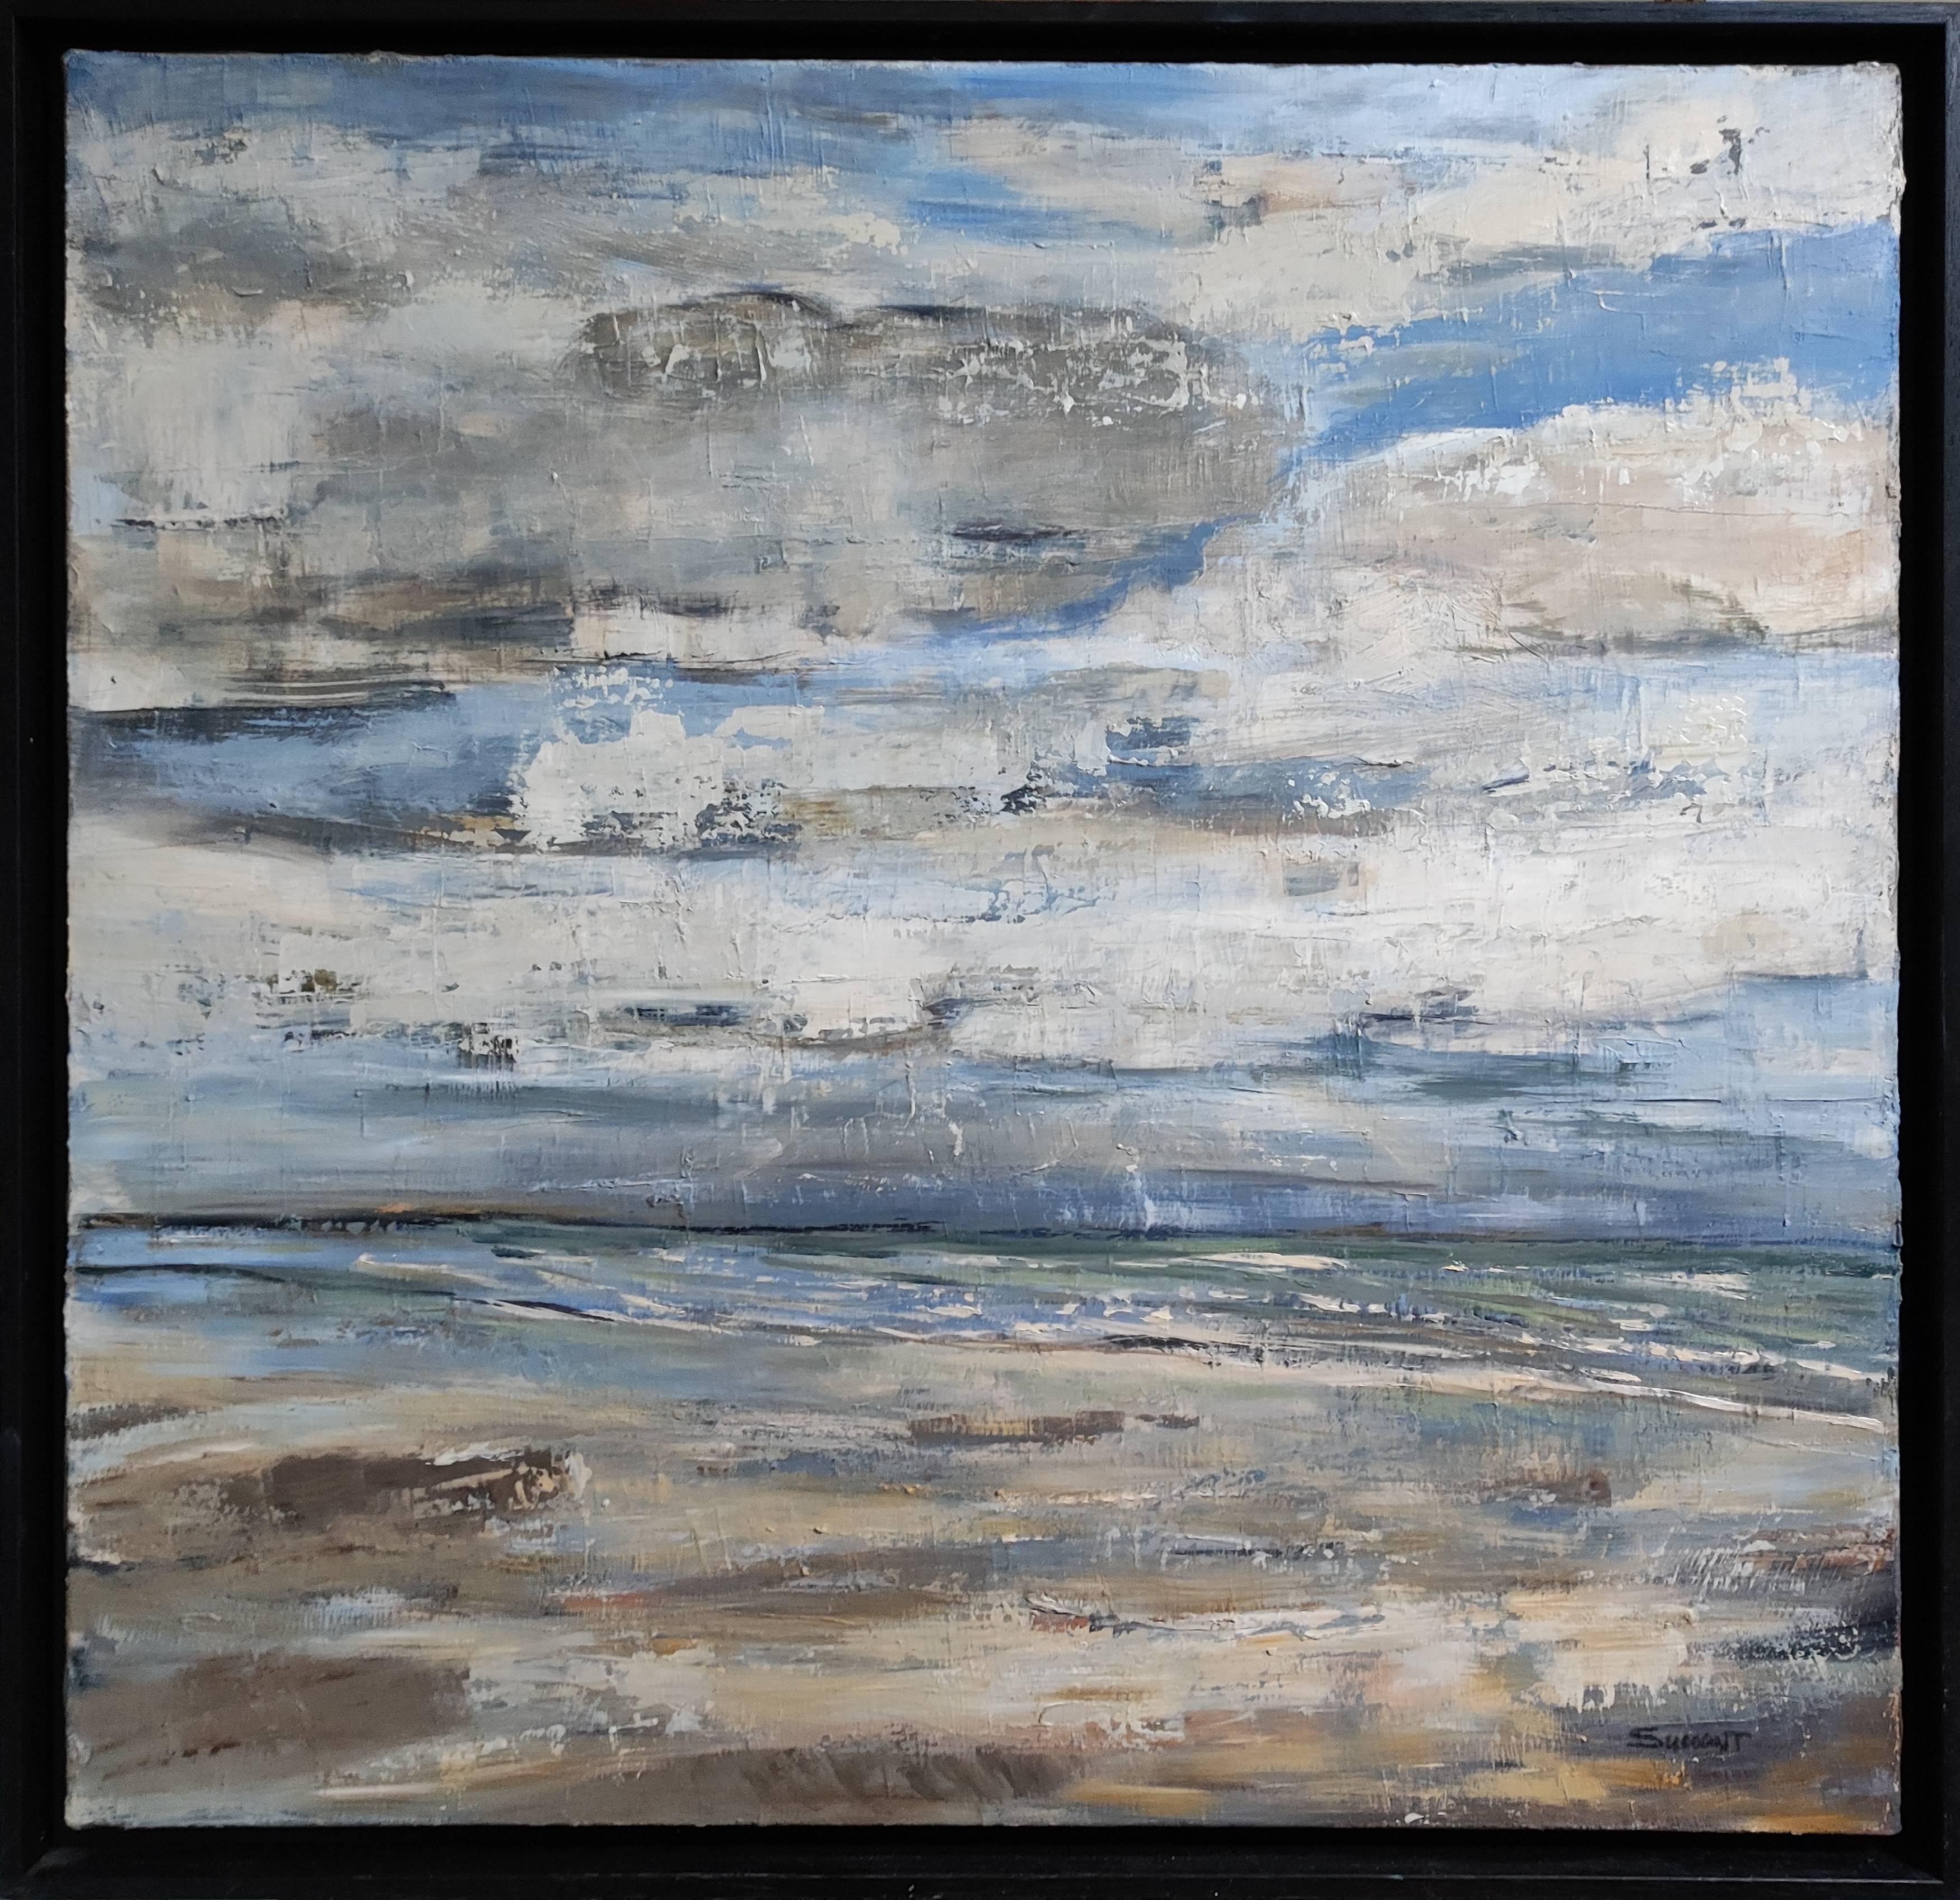 SOPHIE DUMONT Figurative Painting - GRAY SKY, Marine, seaside, Oil on canvas, Semi-abstract, Blue, Impressionism